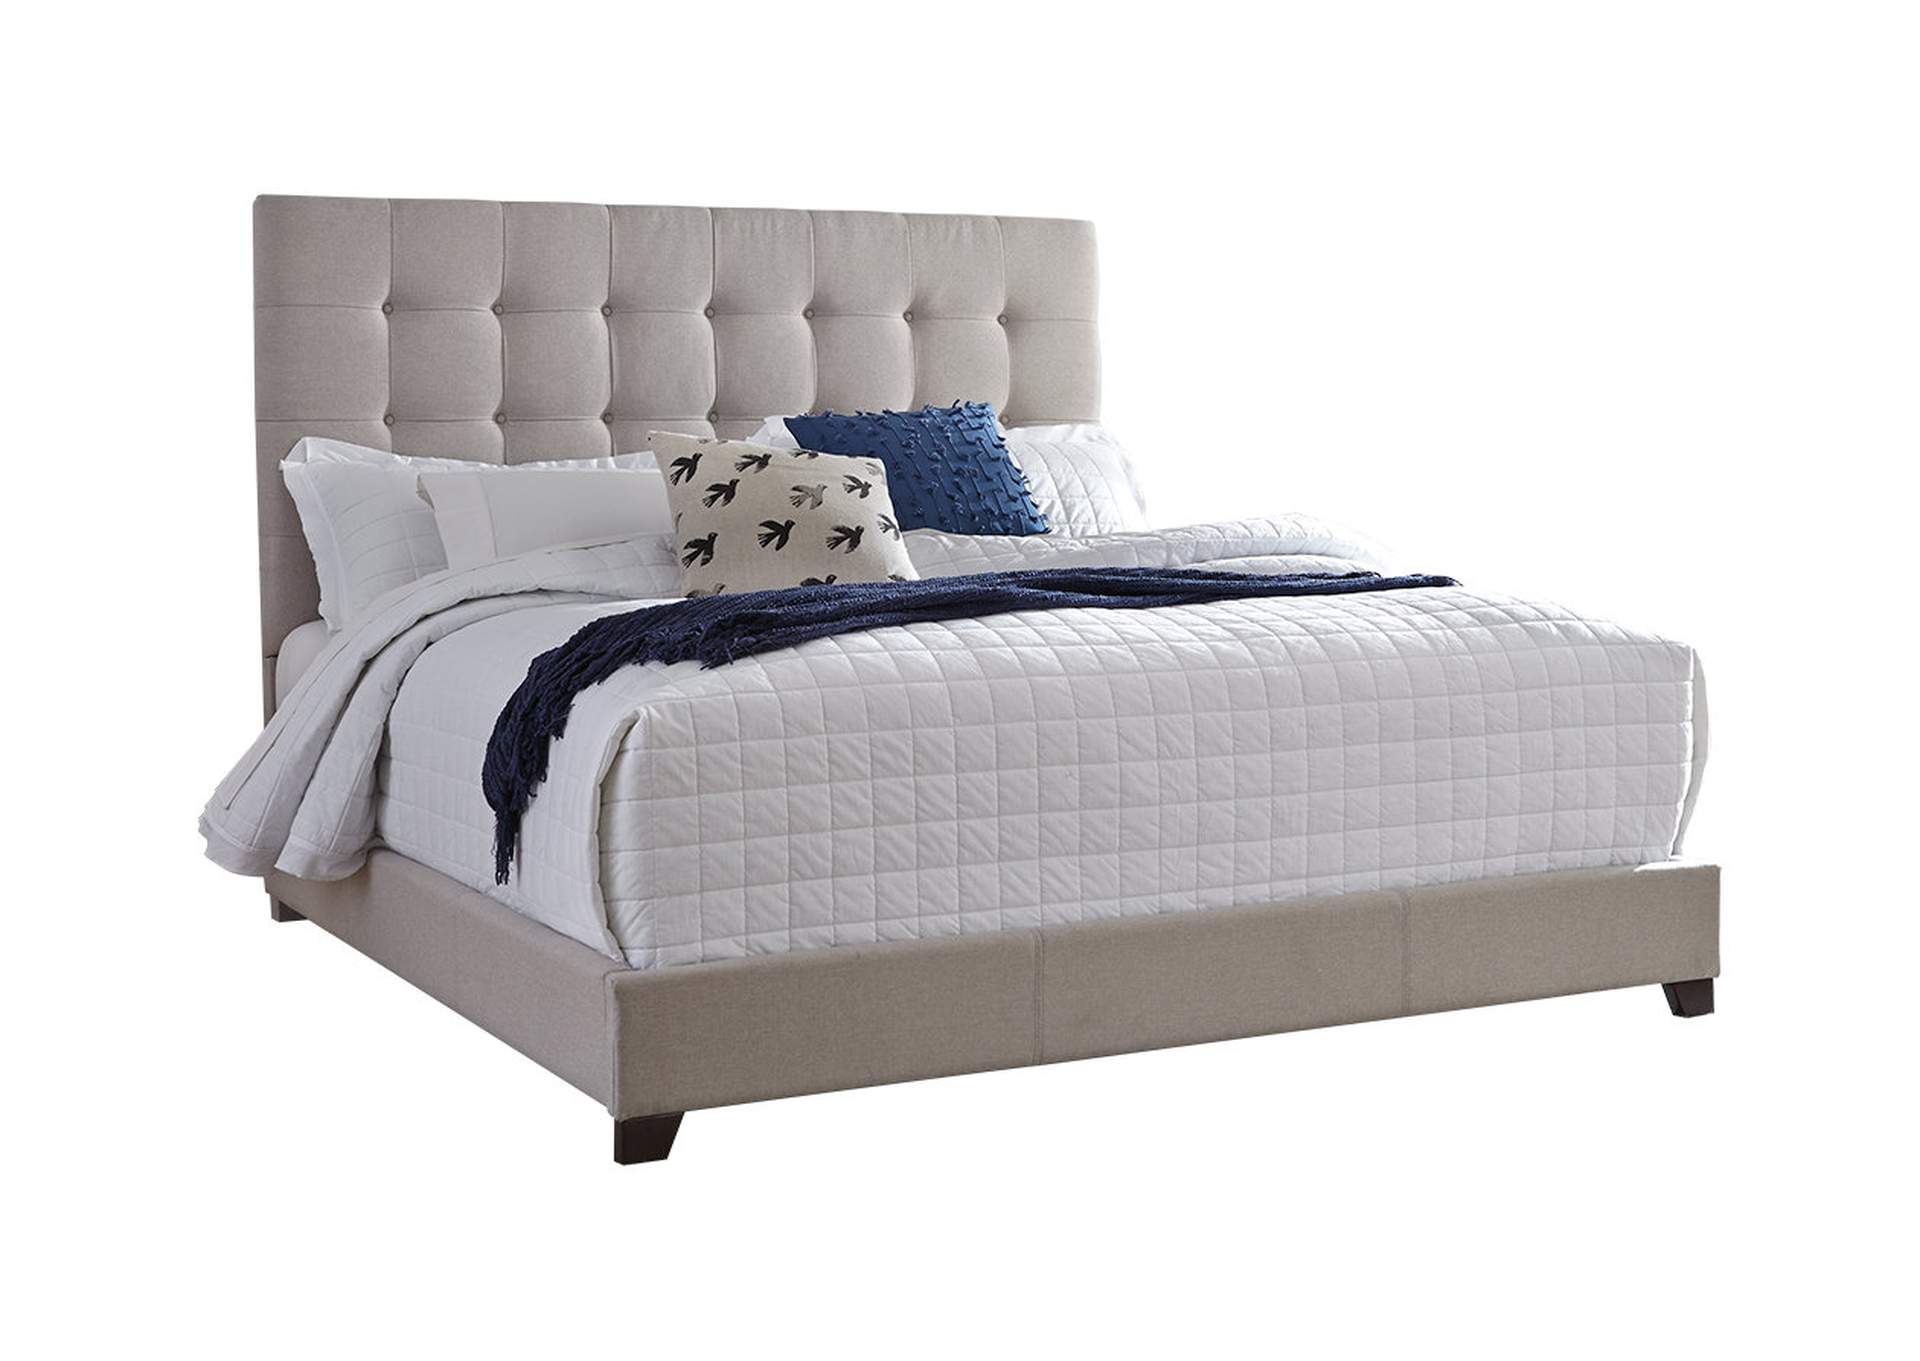 Dolante King Upholstered Bed 에쉴리가구, Donate Bed Frame Calgary